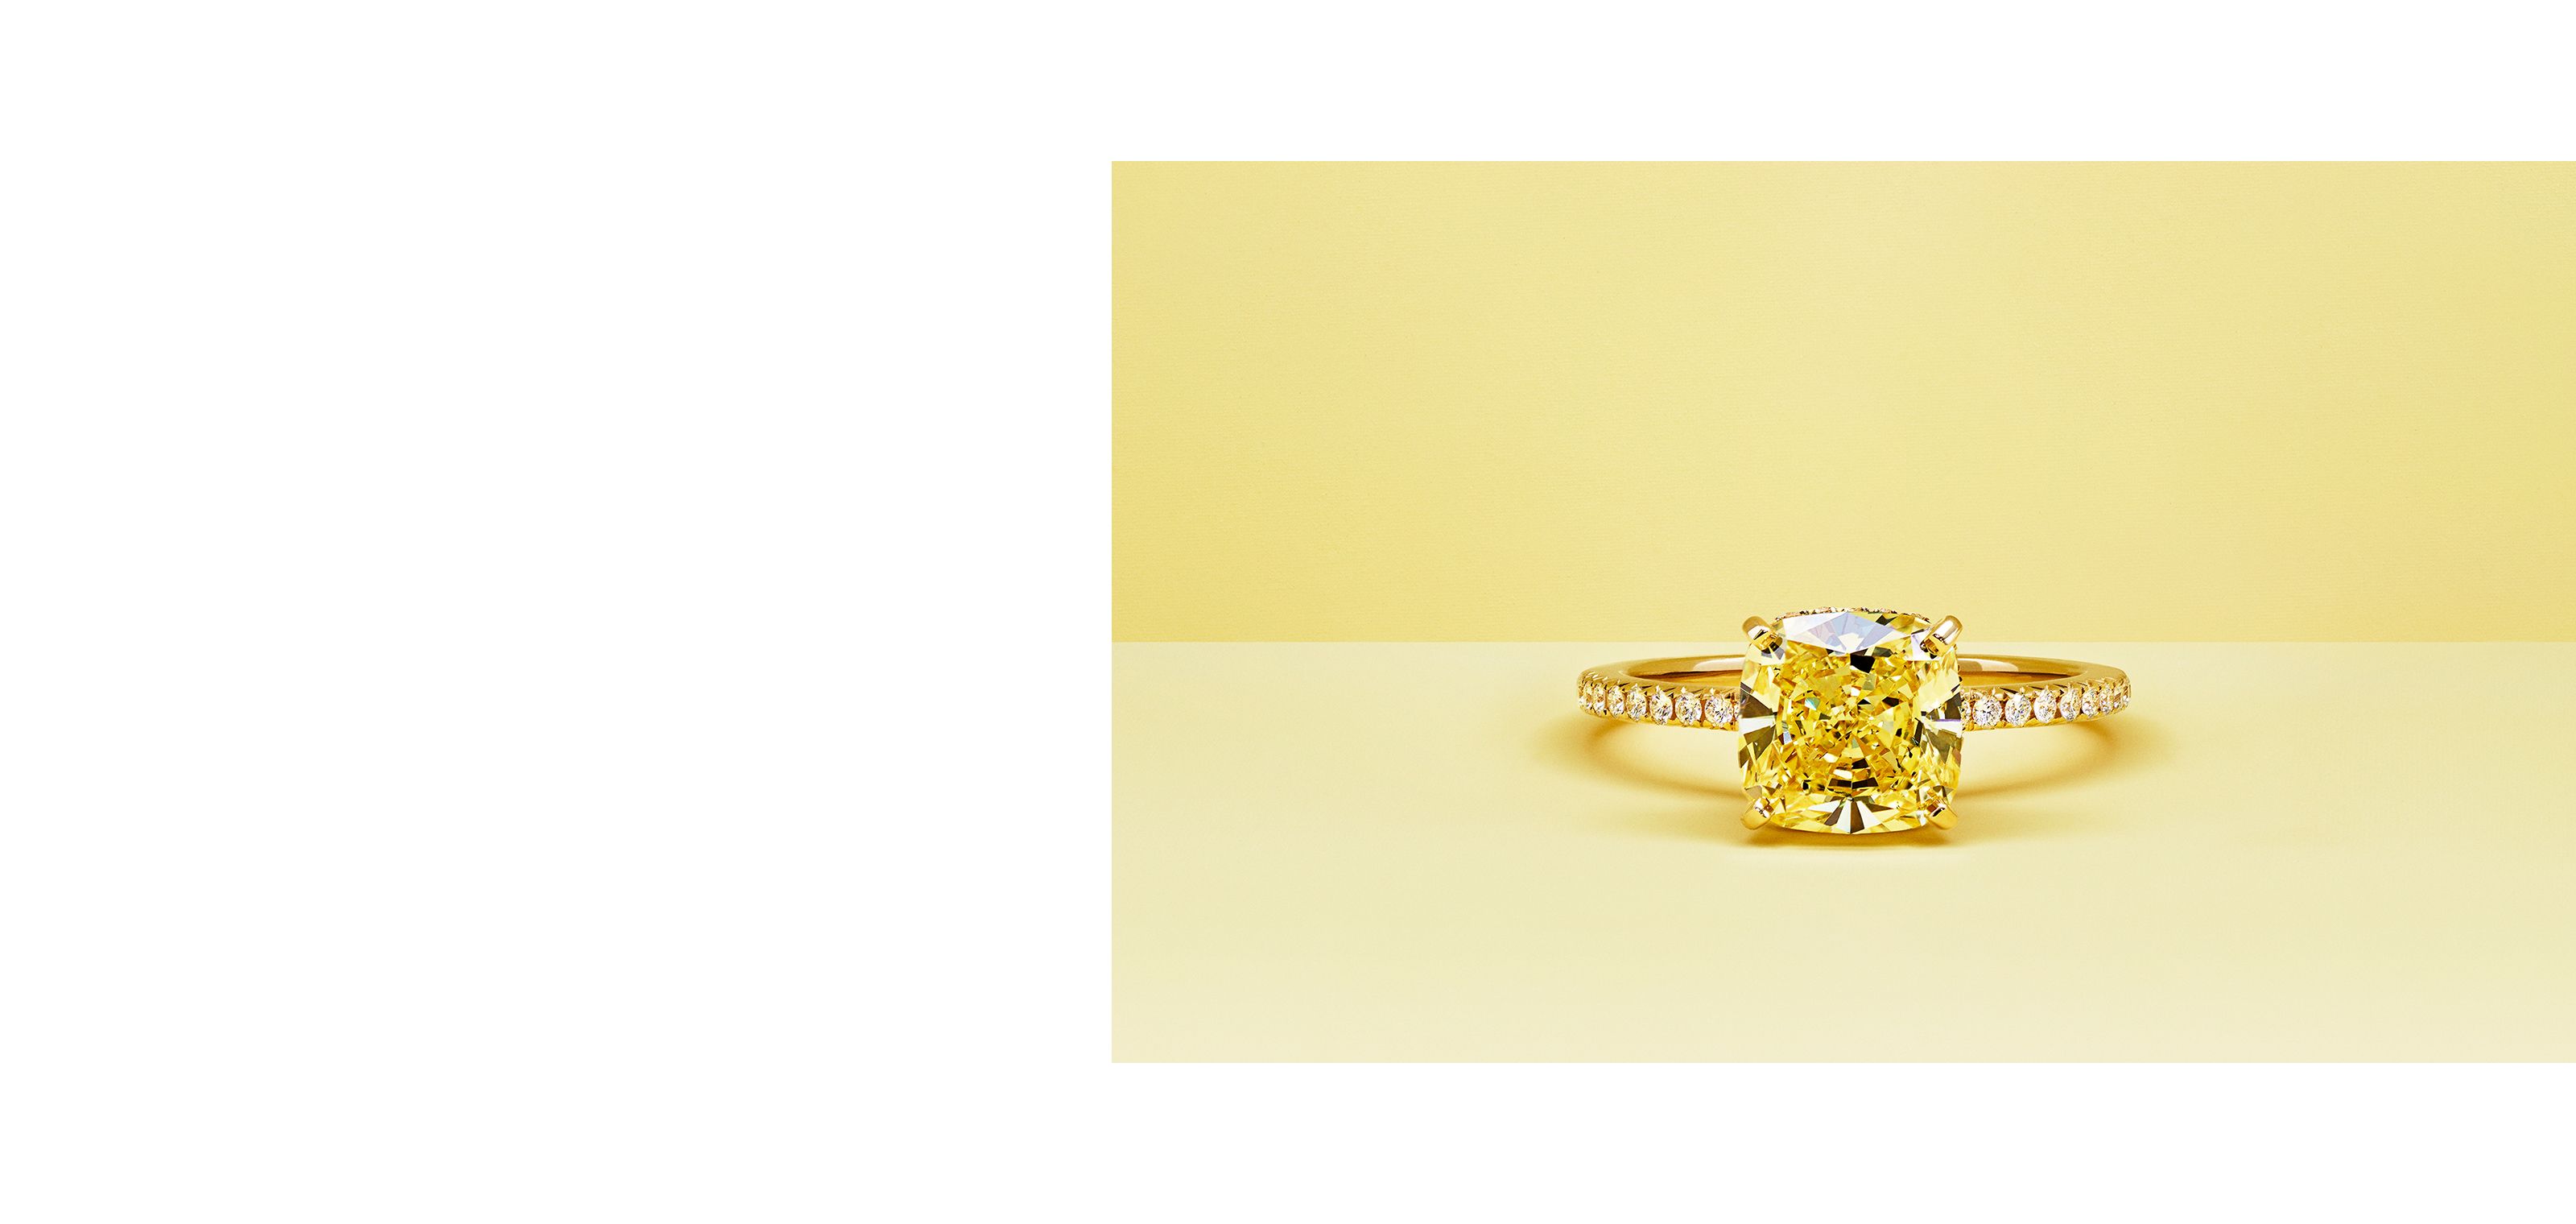 Tiffany & Co. Fancy Yellow Cushion Diamond Solitaire Engagement Ring in 18KY